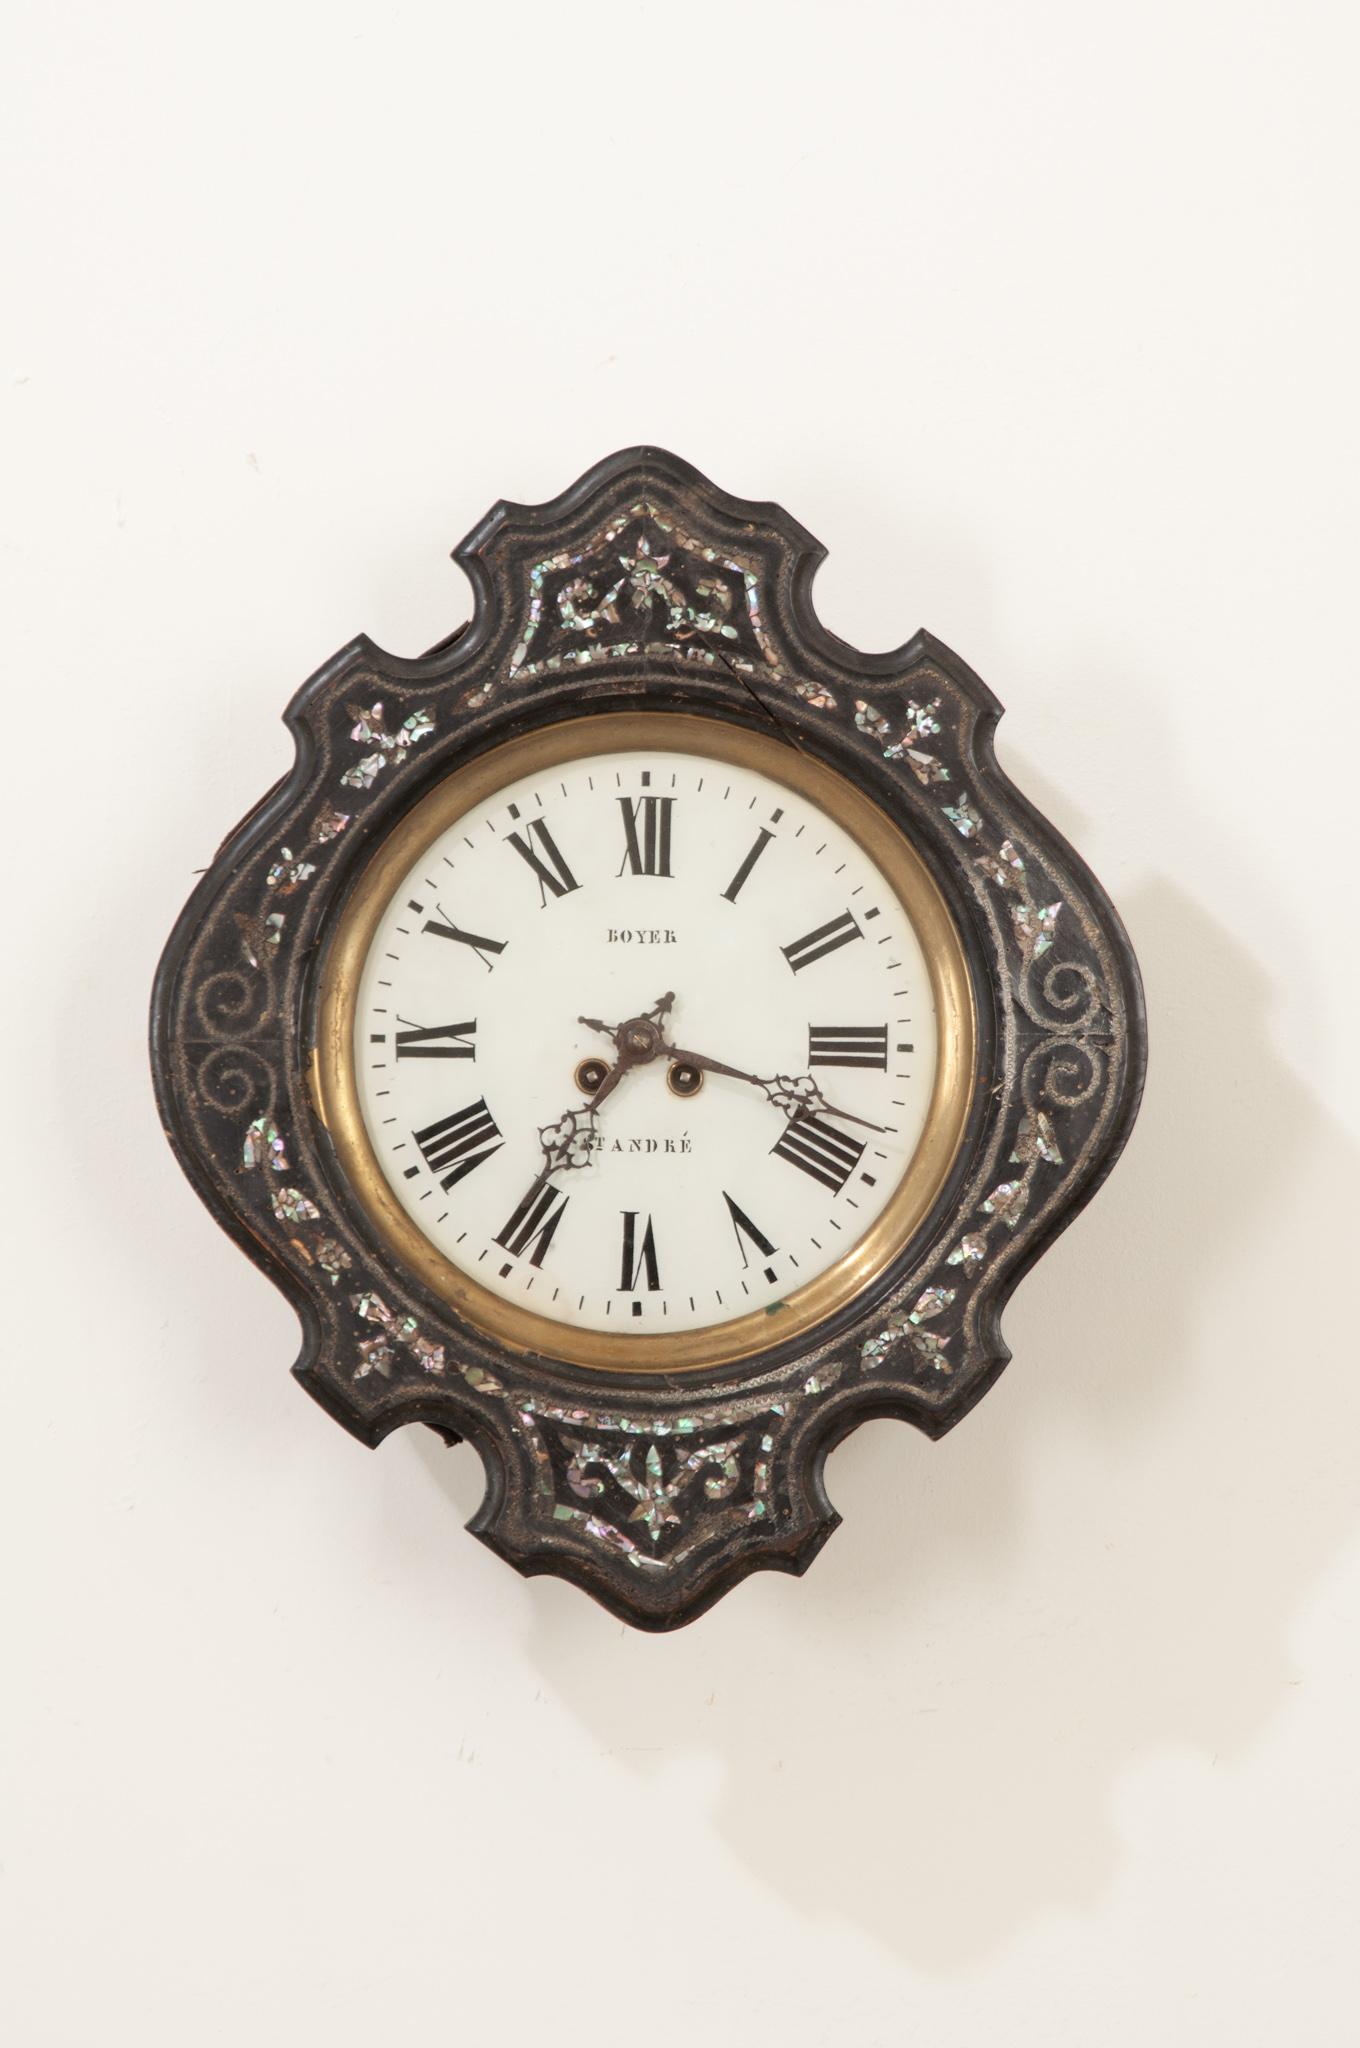 This 19th century clock is stunning with its shaped frame of ebonized wood. Mother-of-pearl floral designs are inlaid in brilliant mother-of-pearl, surrounding the porcelain clock face in symmetrical form. Behind protective glass, the white